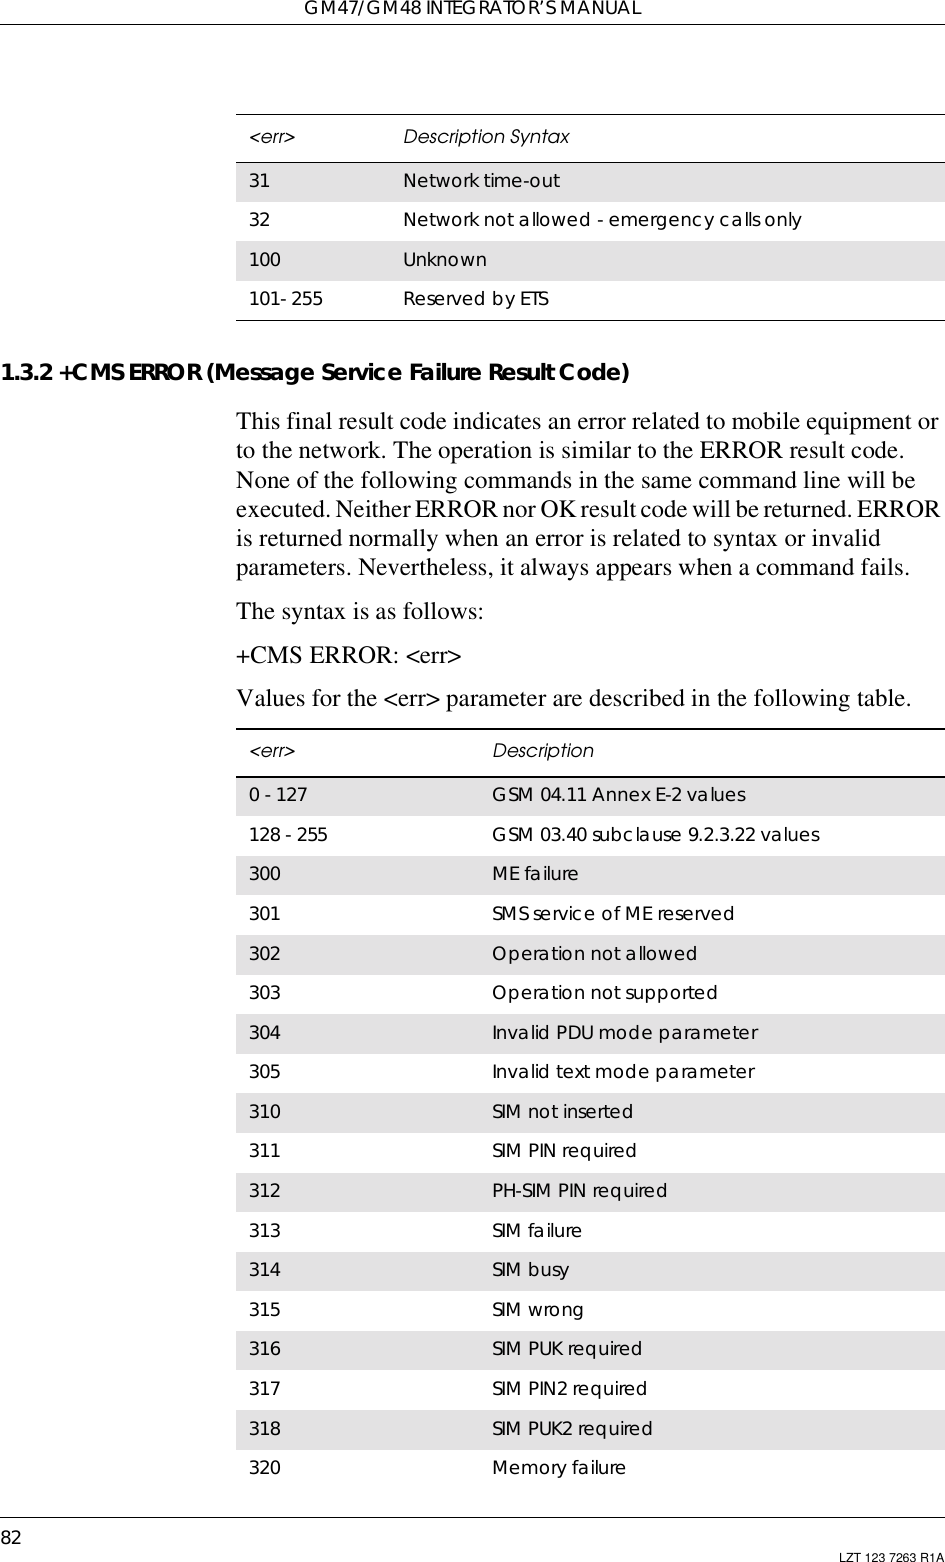 GM47/GM48 INTEGRATOR’S MANUAL82 LZT 123 7263 R1A1.3.2 +CMS ERROR (Message Service Failure Result Code)This final result code indicates an error related to mobile equipment orto the network. The operation is similar to the ERROR result code.None of the following commands in the same command line will beexecuted. Neither ERROR nor OK result code will be returned. ERRORis returned normally when an error is related to syntax or invalidparameters. Nevertheless, it always appears when a command fails.The syntax is as follows:+CMS ERROR: &lt;err&gt;Values for the &lt;err&gt; parameter are described in the following table.31 Network time-out32 Network not allowed - emergency calls only100 Unknown101- 255 Reserved by ETS&lt;err&gt; Description Syntax&lt;err&gt; Description0 - 127 GSM 04.11 Annex E-2 values128 - 255 GSM 03.40 subclause 9.2.3.22 values300 ME failure301 SMS service of ME reserved302 Operation not allowed303 Operation not supported304 Invalid PDU mode parameter305 Invalid text mode parameter310 SIM not inserted311 SIM PIN required312 PH-SIM PIN required313 SIM failure314 SIM busy315 SIM wrong316 SIM PUK required317 SIM PIN2 required318 SIM PUK2 required320 Memory failure